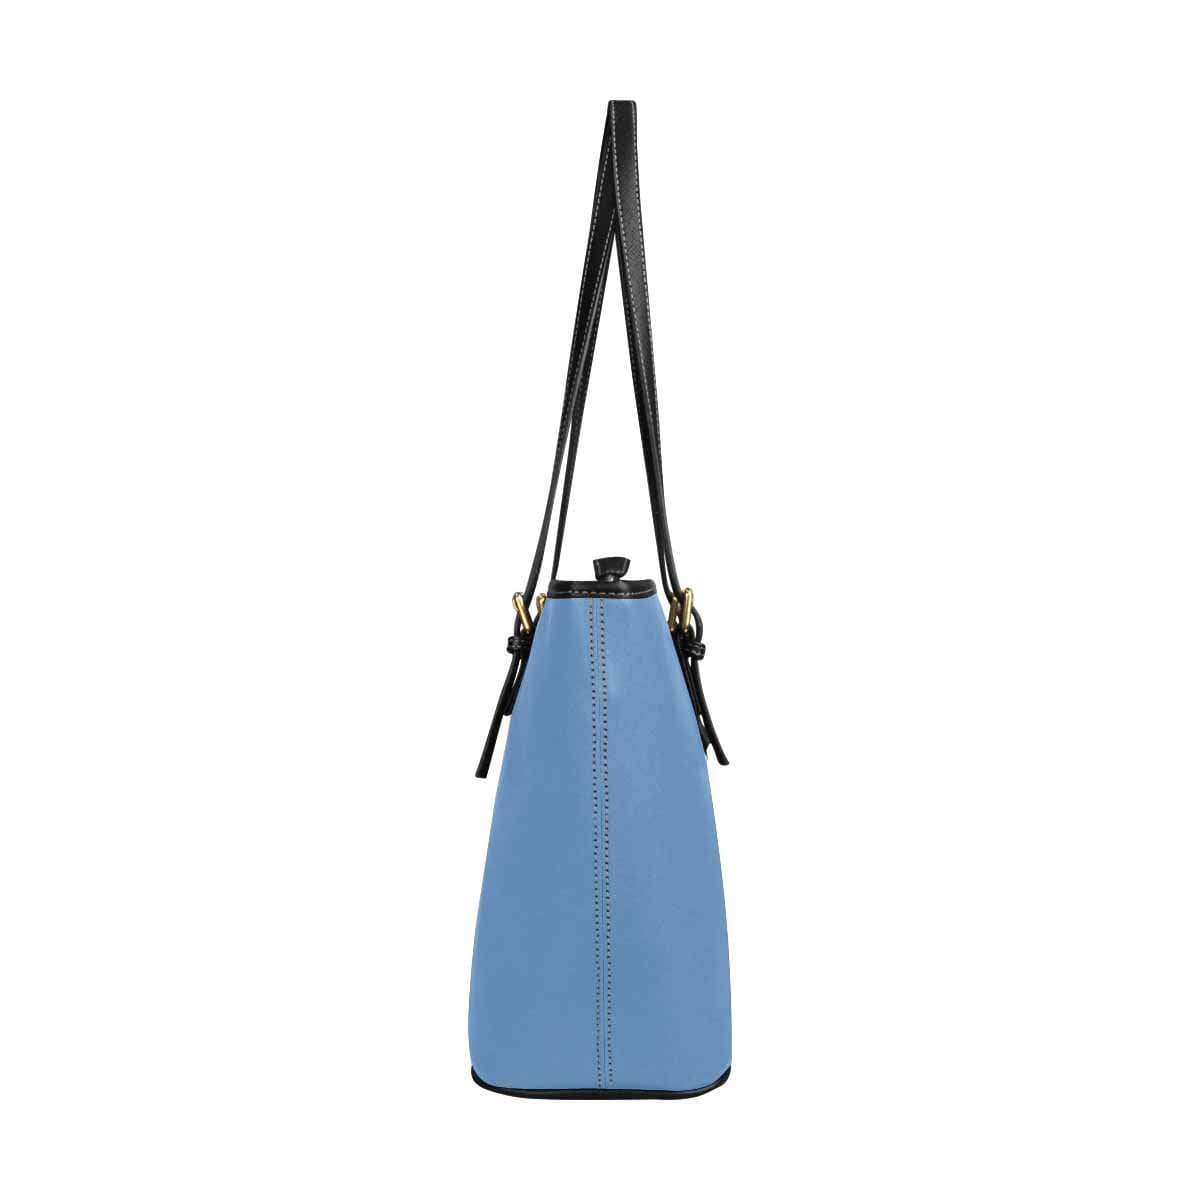 Large Leather Tote Shoulder Bag - Blue Gray - Bags | Leather Tote Bags